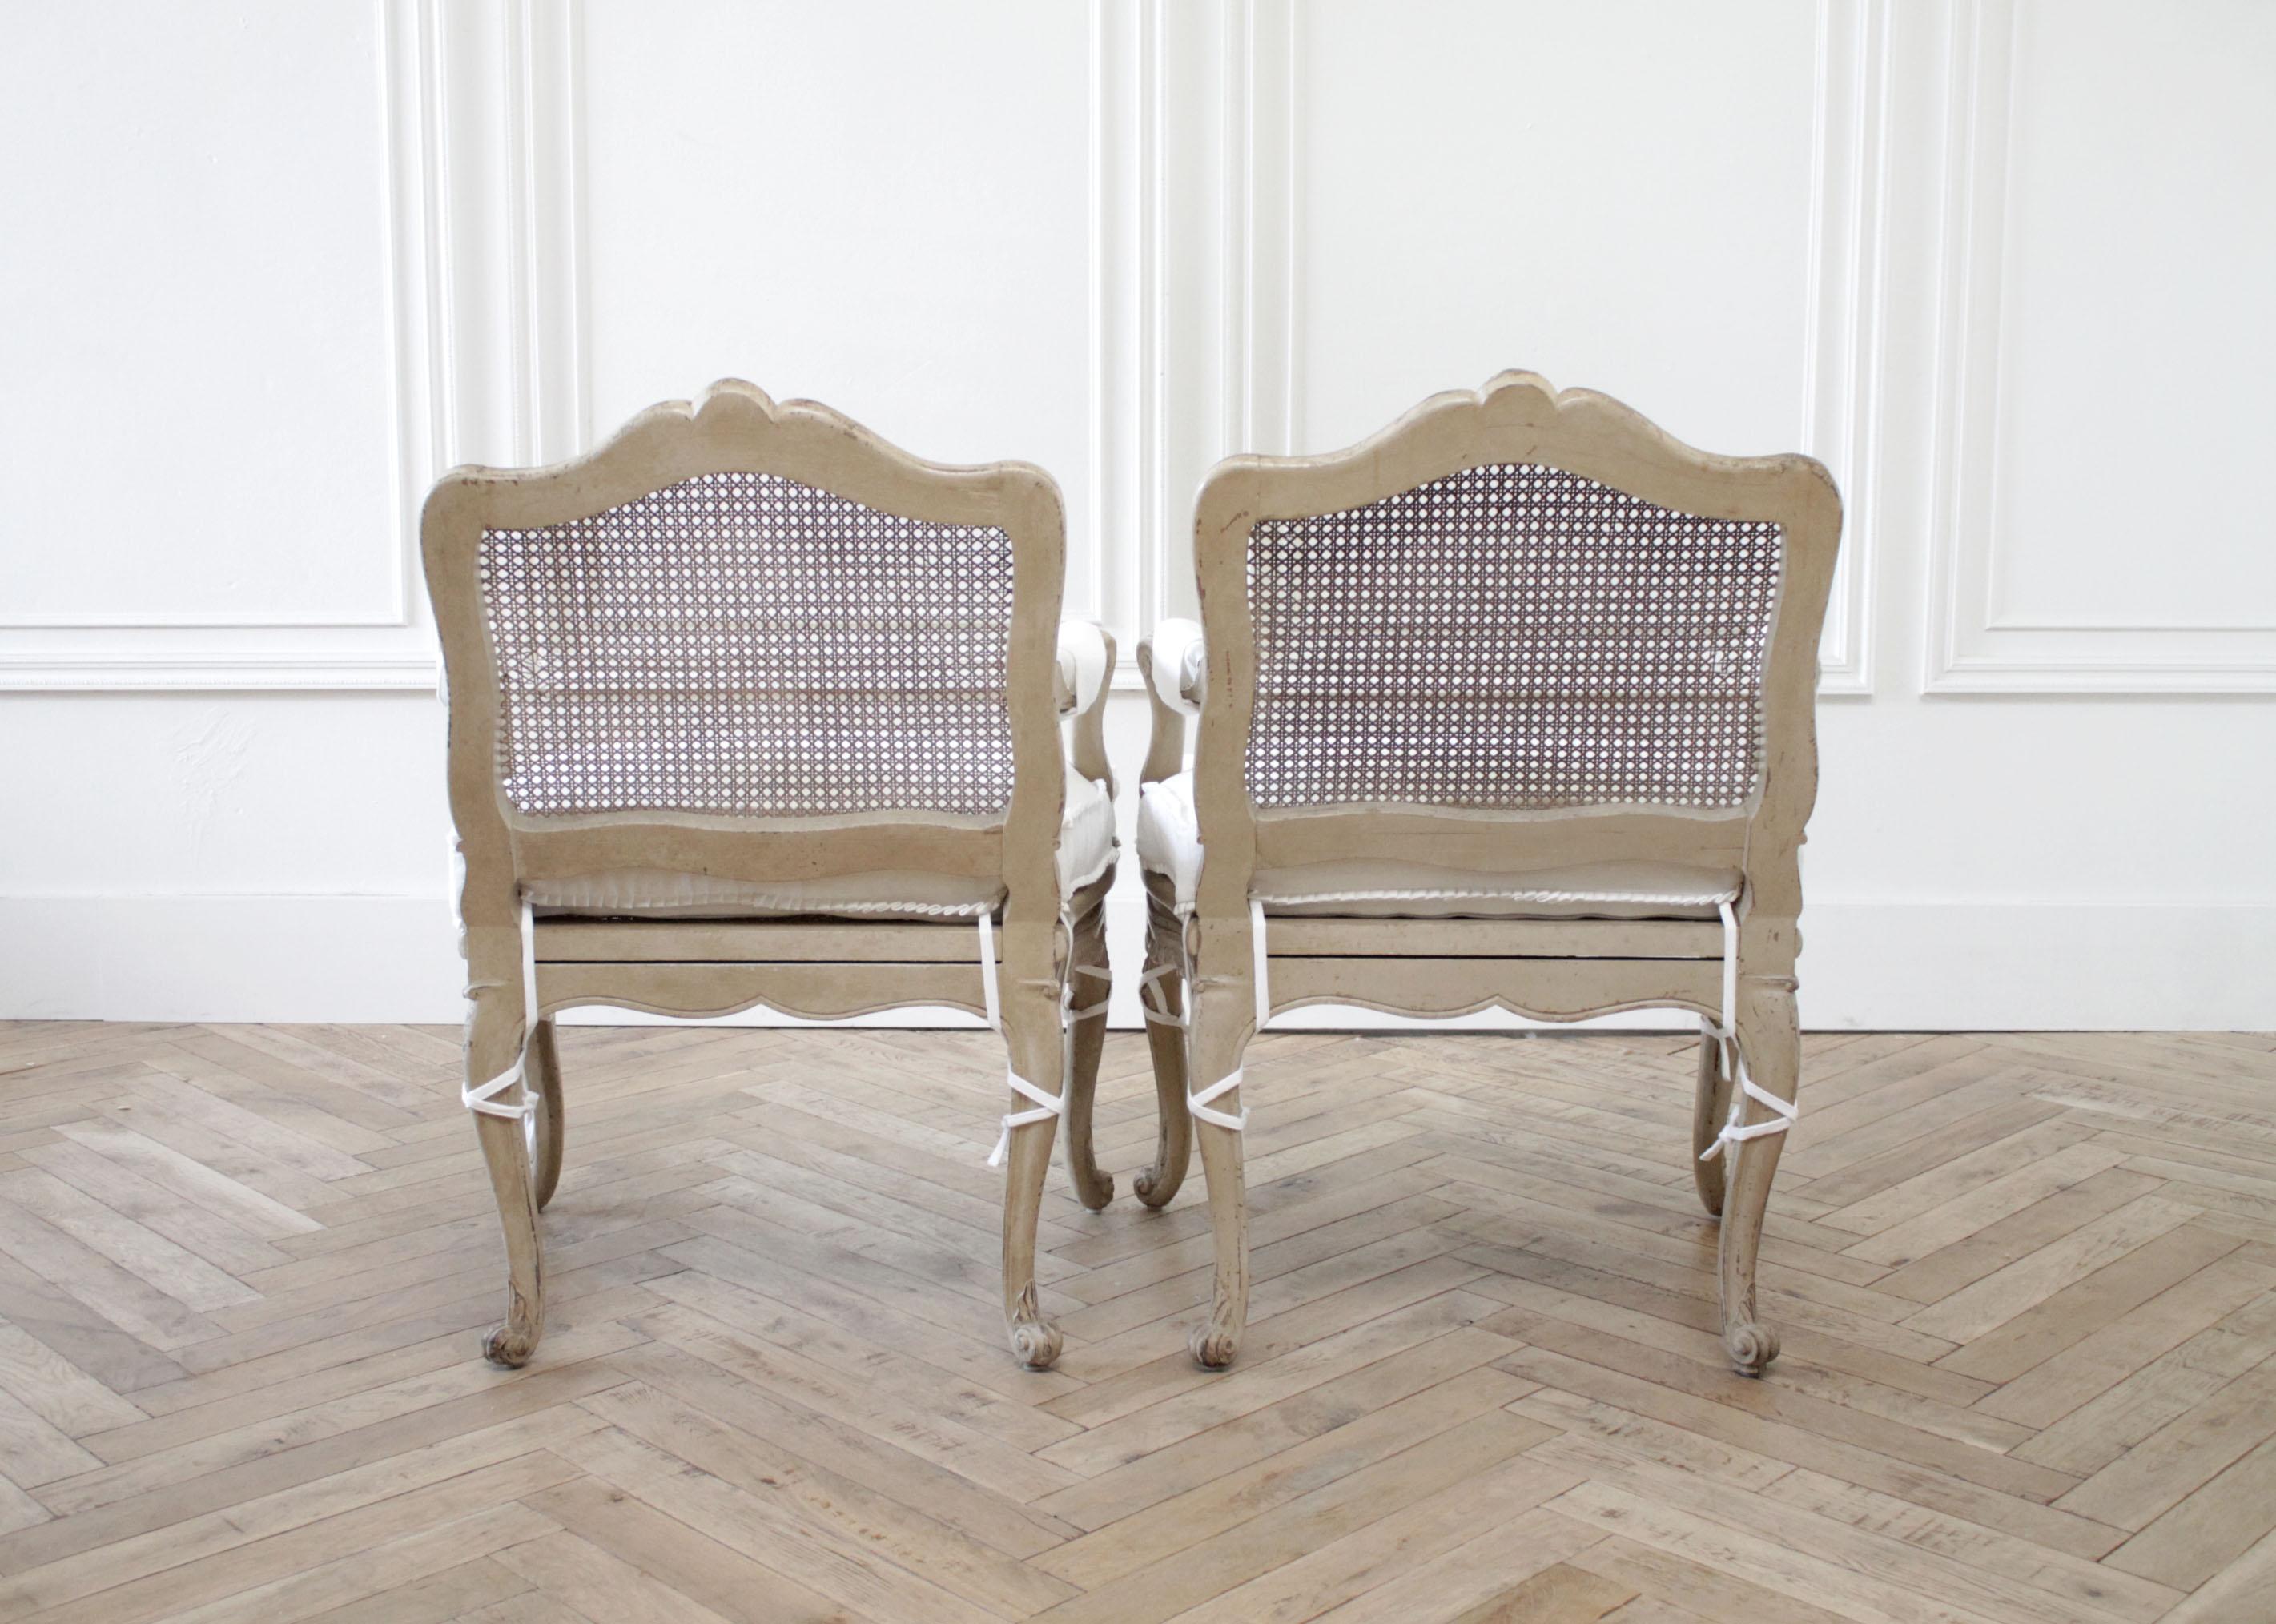 20th Century Pair of Antique French Arm Chairs in Original Painted Finish and White Linen